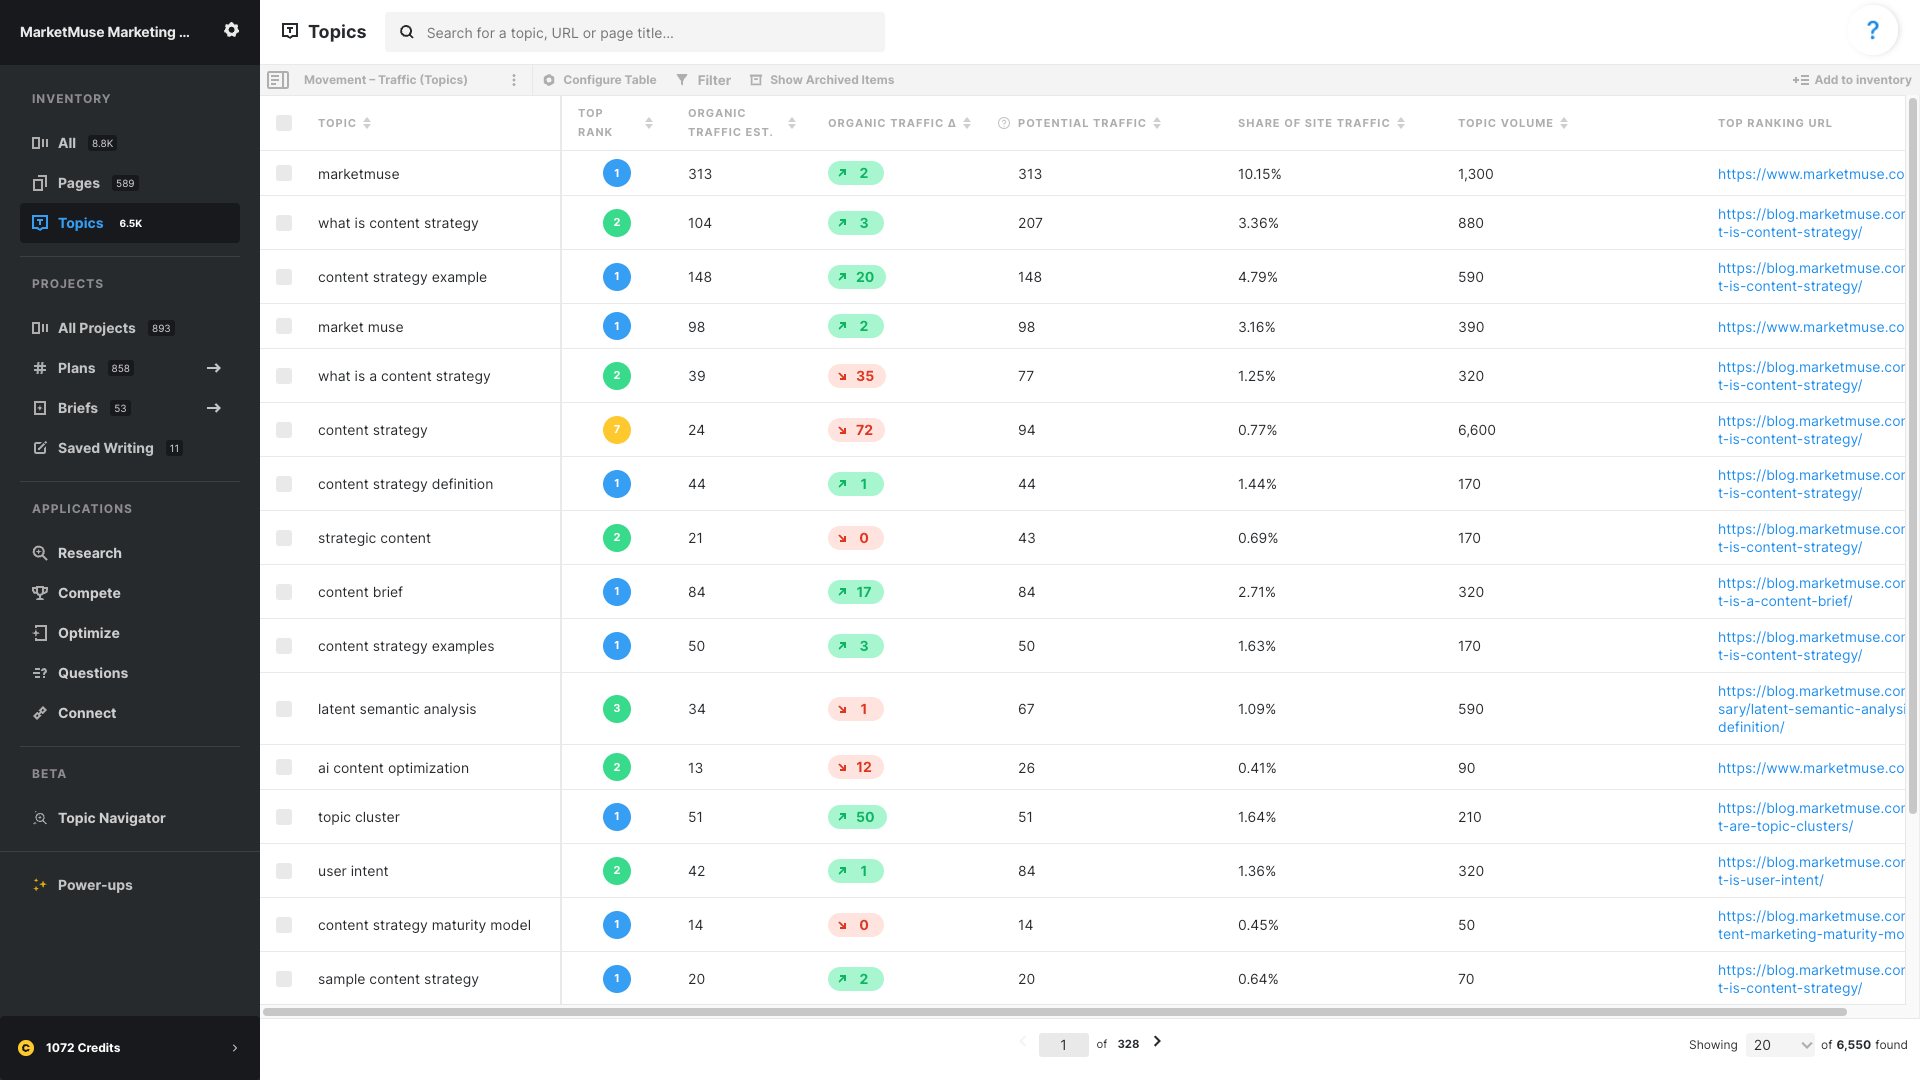 MarketMuse Saved View Movement - Traffic (Topics) showing a table with the following data columns; TOPIC, TOP RANK, ORGANIC TRAFFIC EST., ORGANIC TRAFFIC Δ, POTENTIAL TRAFFIC, SHARE OF SITE TRAFFIC	TOPIC VOLUME, and TOP RANKING URL.